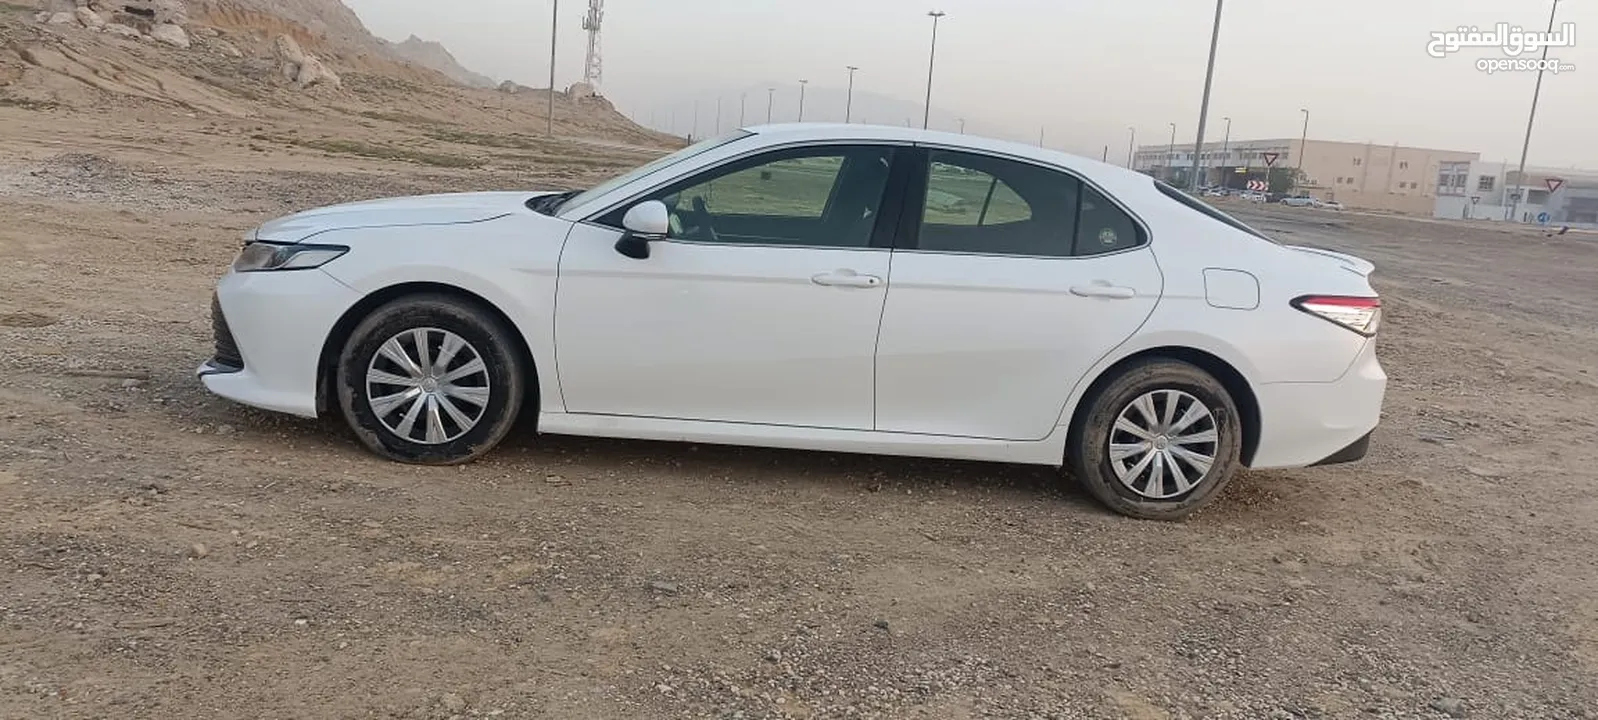 Toyota Camry good condition accident free model 2019 GCC space